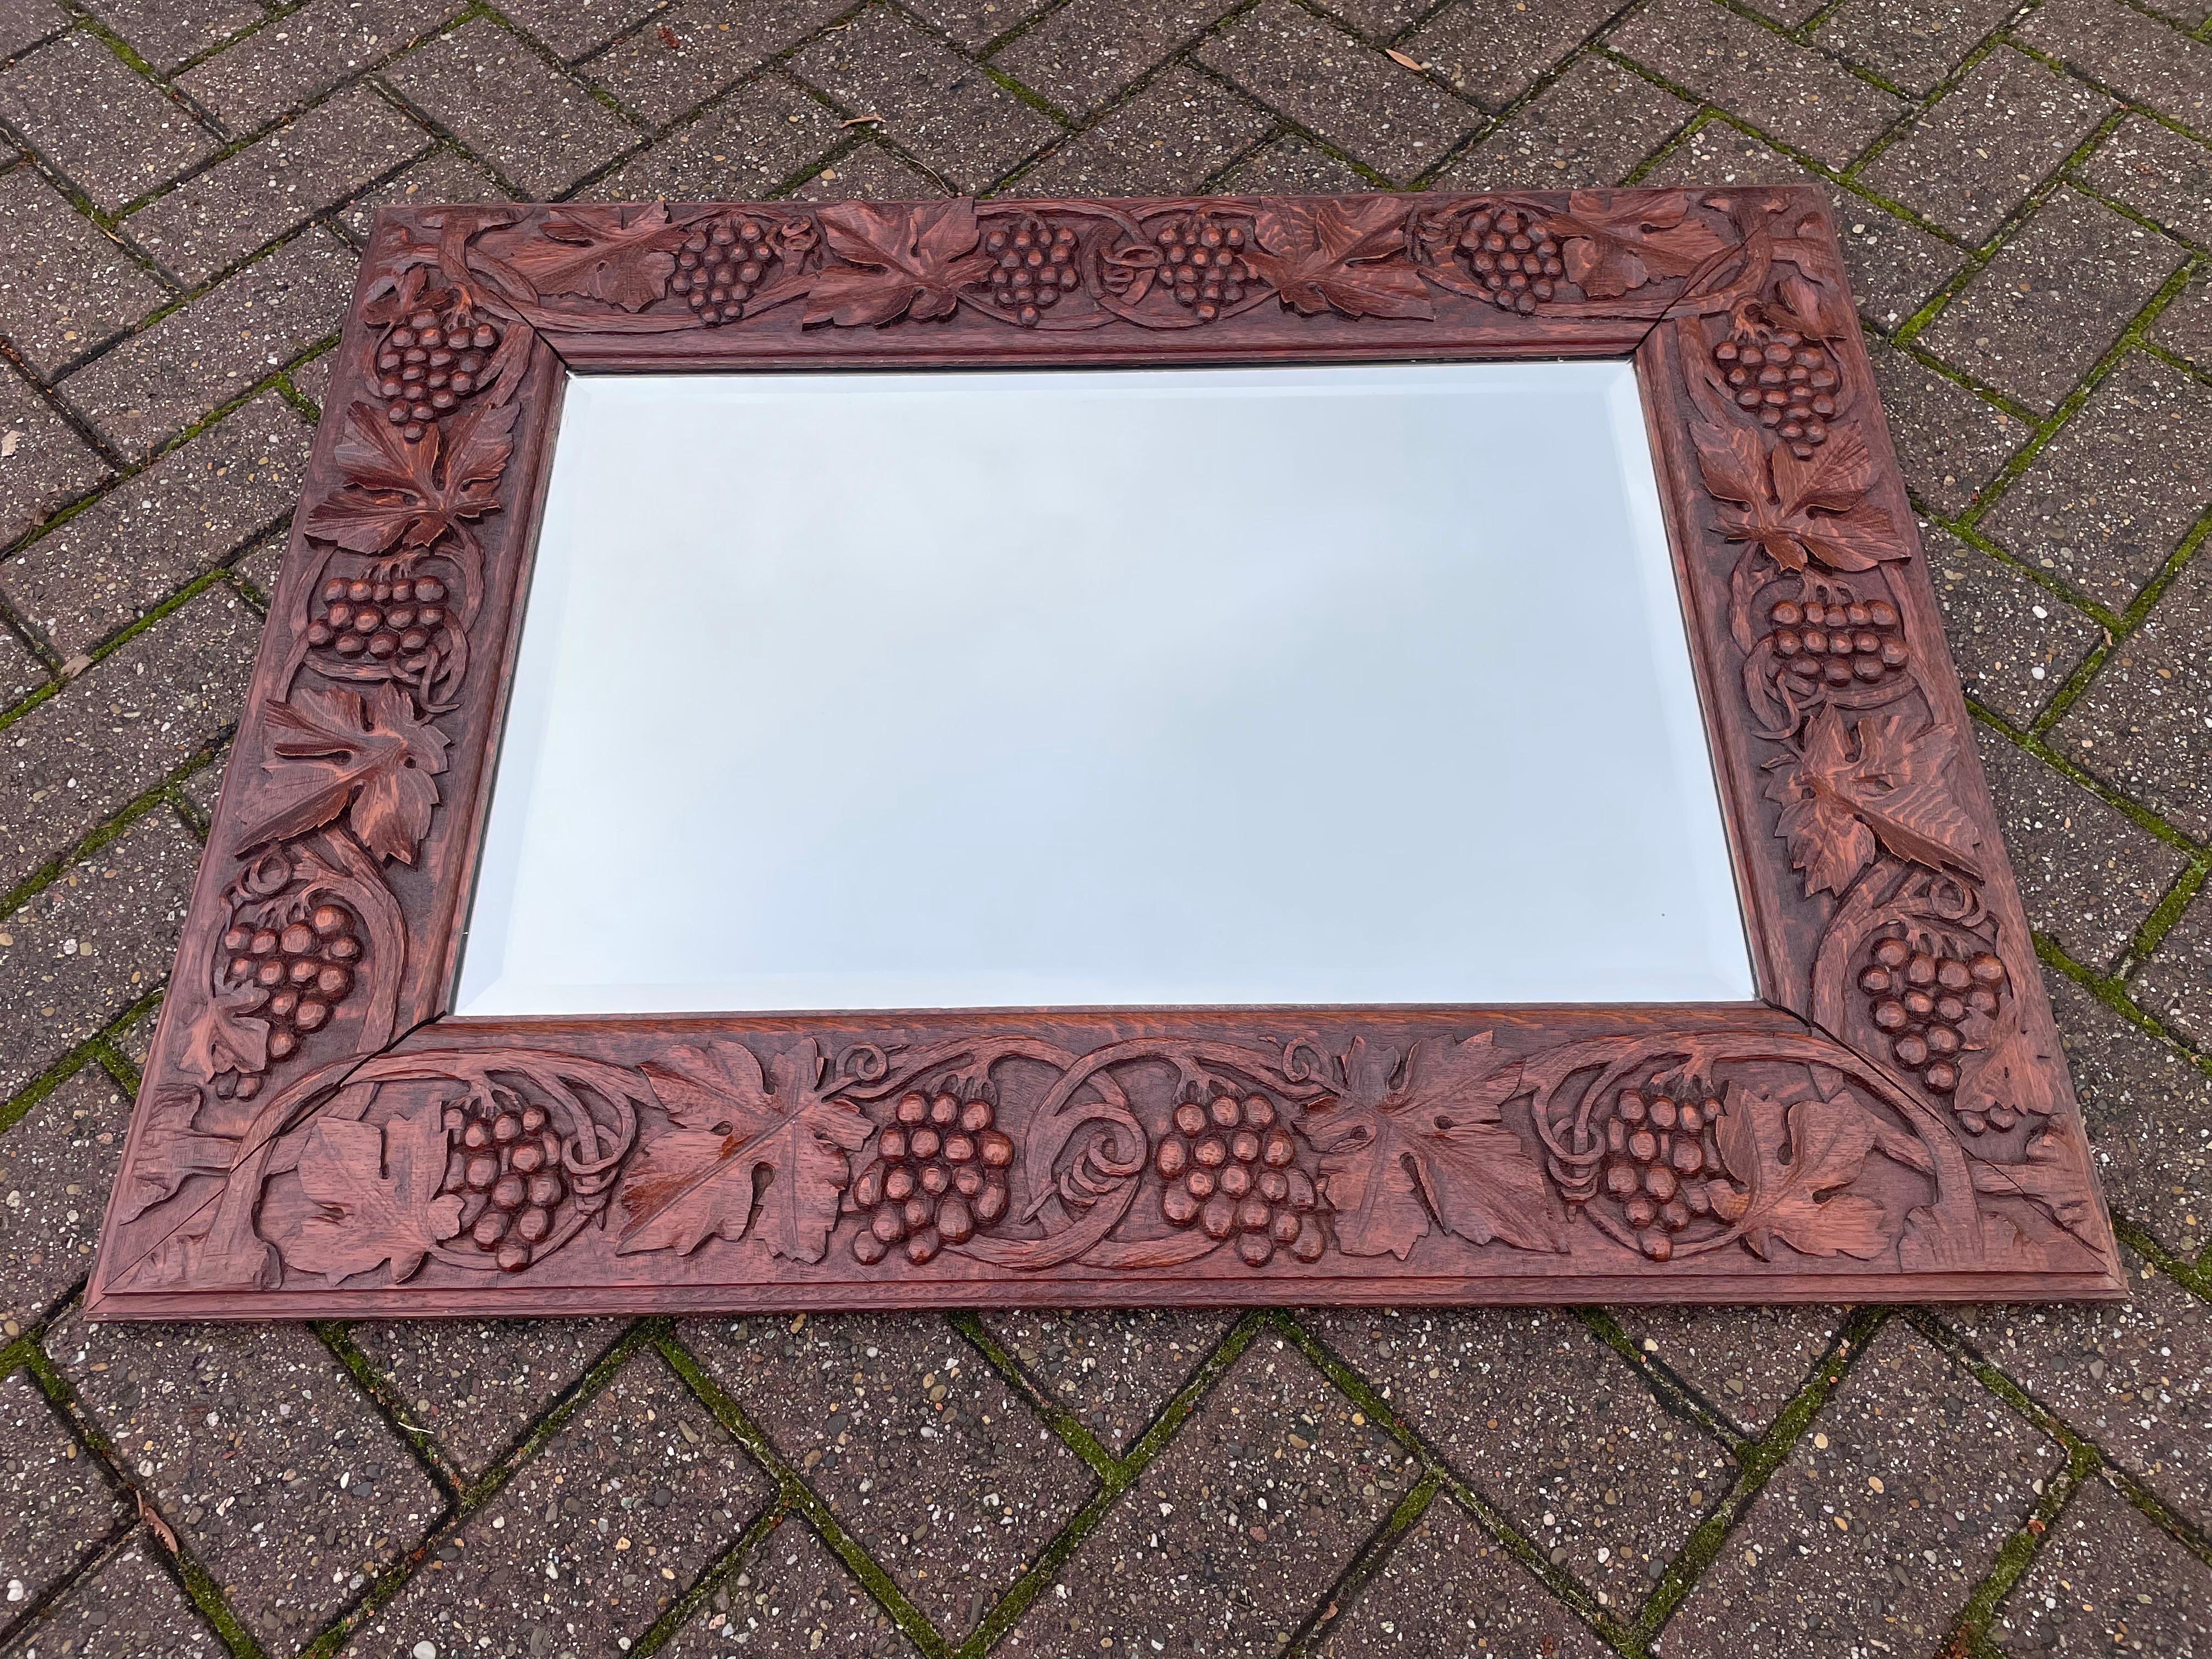 Antique, exceptional and unique wall mirror.

Via one of our foreign contacts we recently purchased this perfectly realistic grapevine wall mirror. The stunning and unique mirror frame is all handcarved out of solid tiger oak. Not only does it come